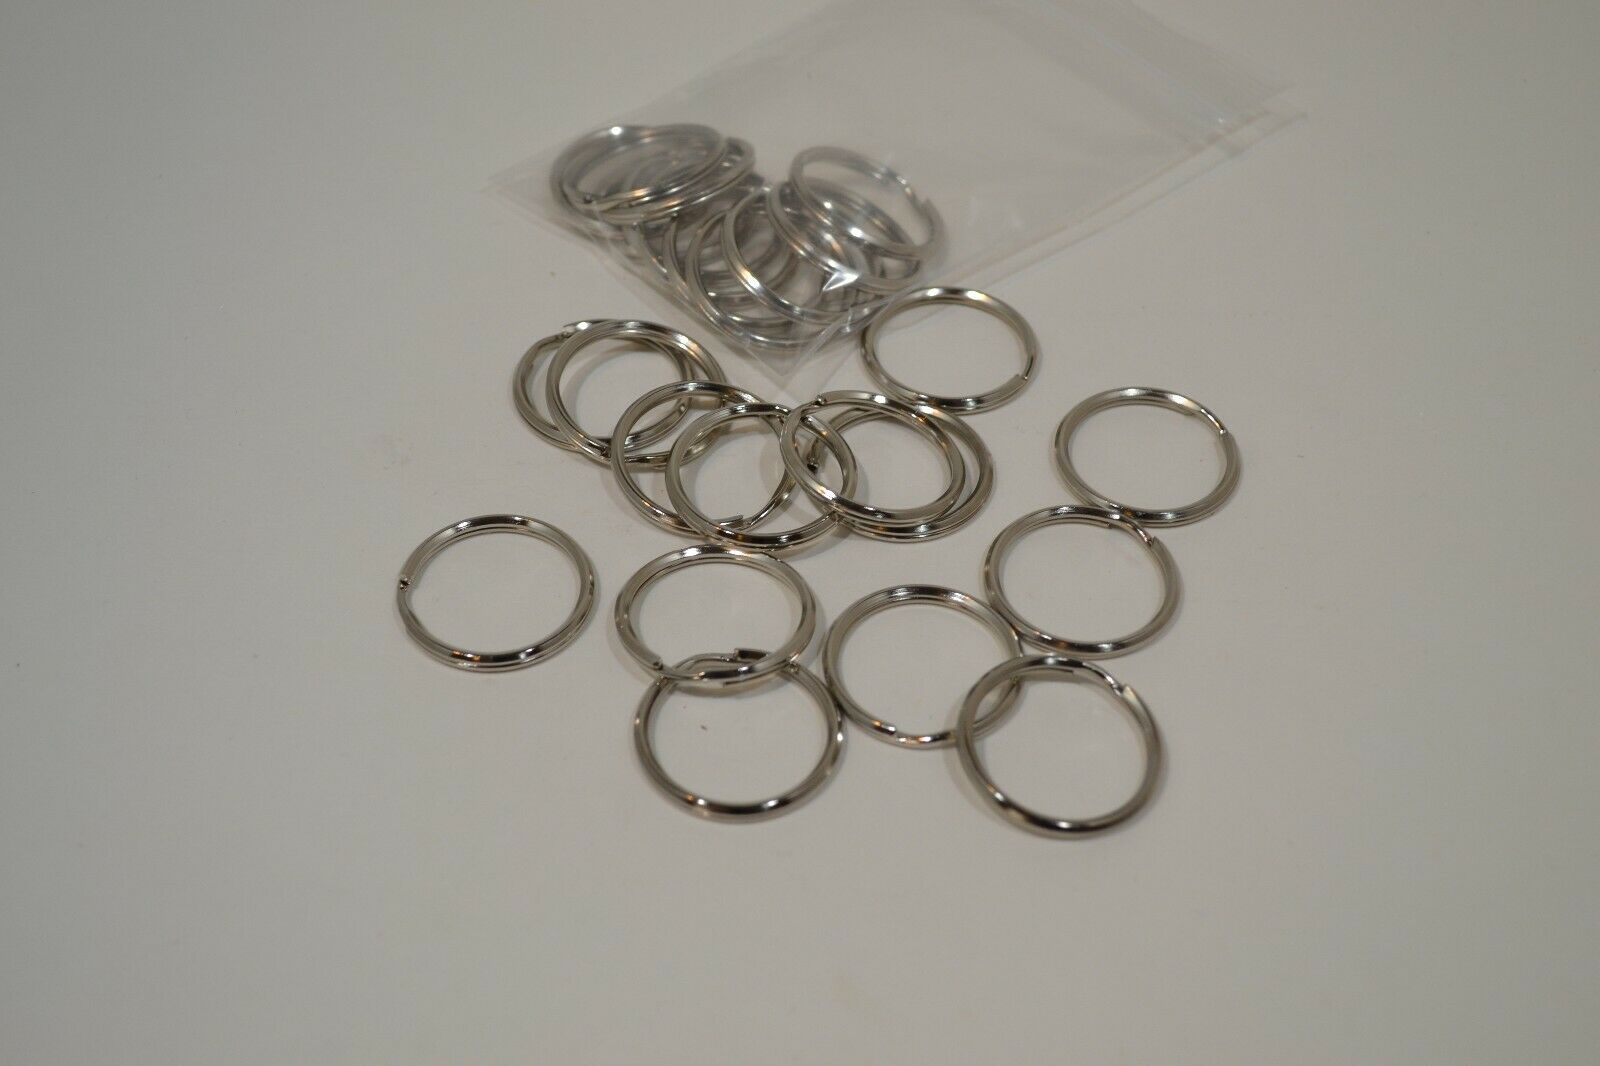 Key Ring - 1" - Nickel Plated - Pack Of 50 (f40)